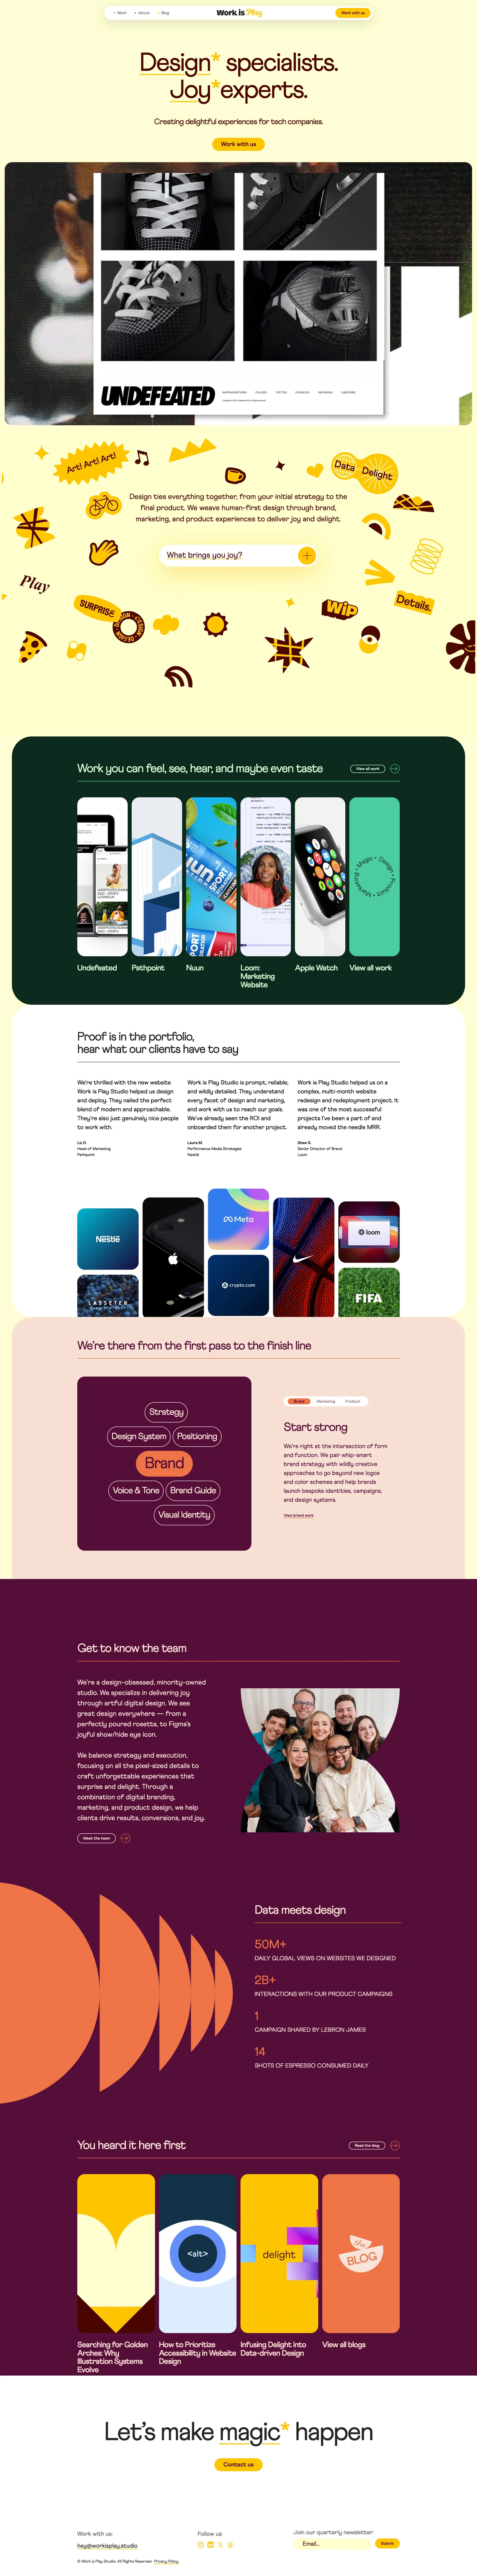 Work is Play Landing Page Example: We’re a fun-size, full-service design studio. Our studio was founded on the belief that original, impactful work is best created with a healthy dose of play.